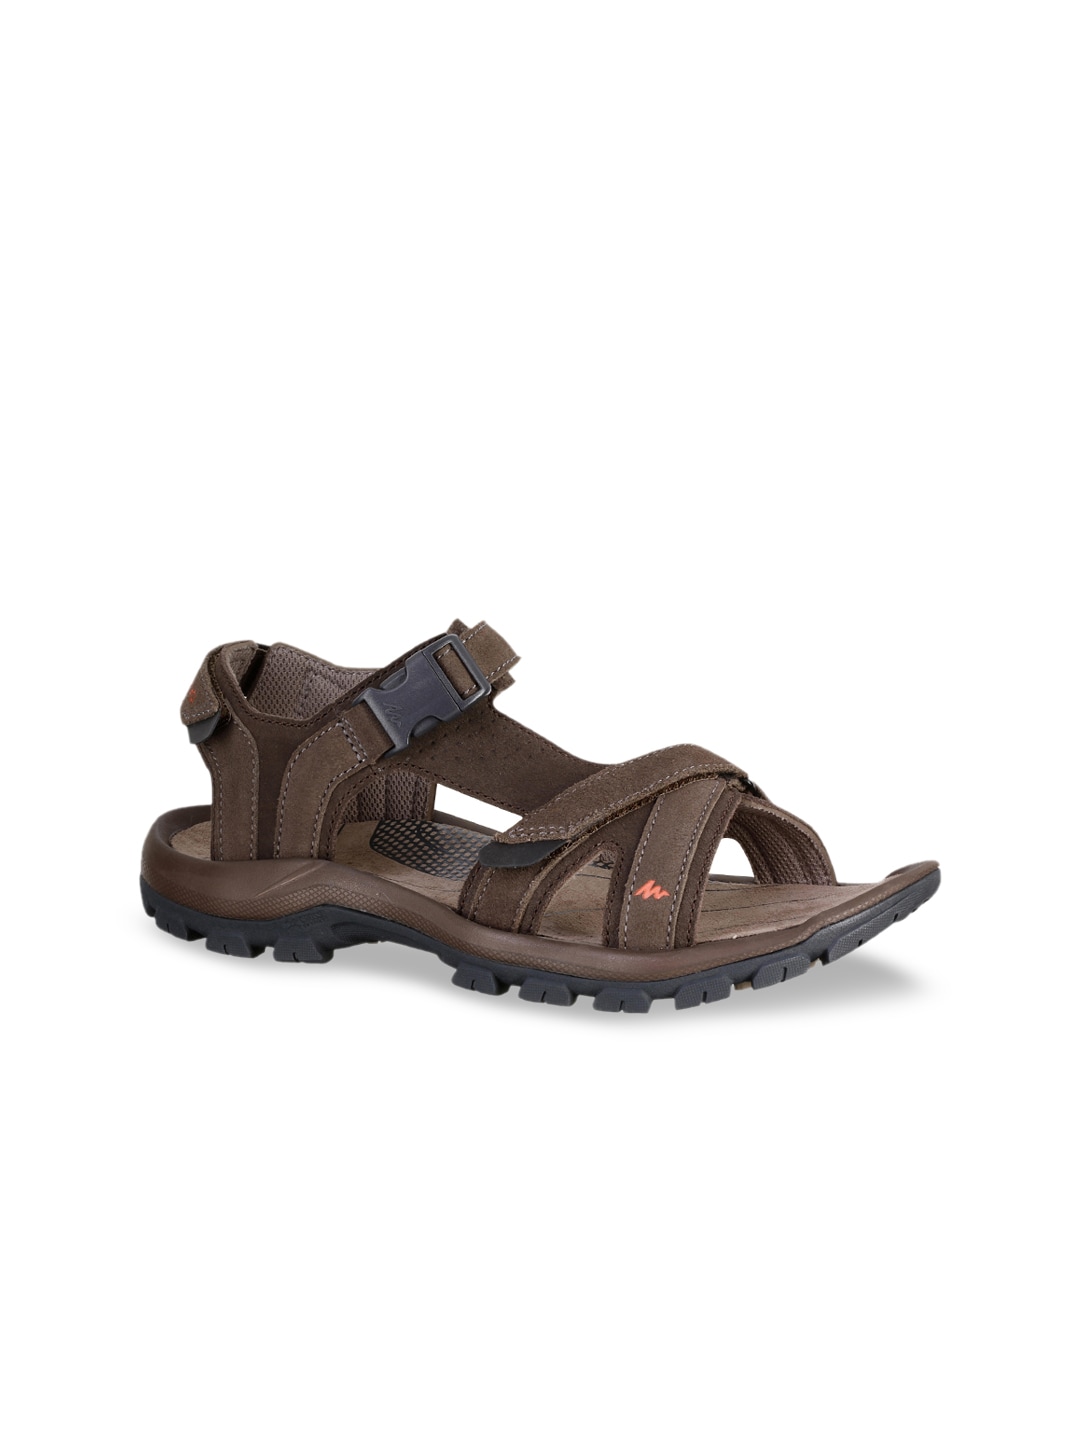 Quechua By Decathlon Unisex Brown Leather Sports Sandal Price in India